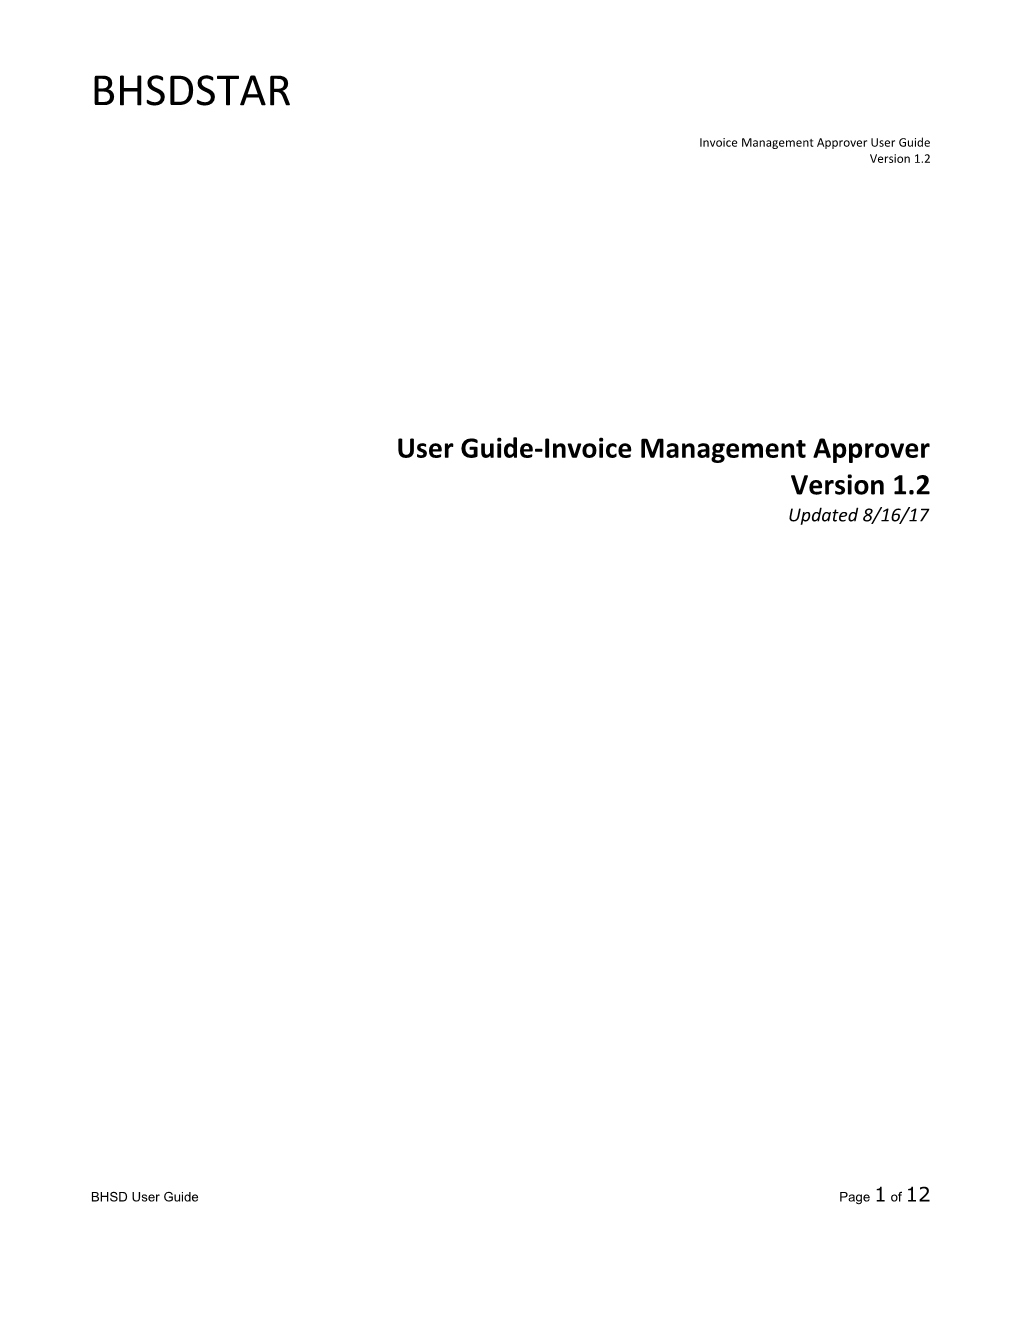 User Guide-Invoice Management Approver